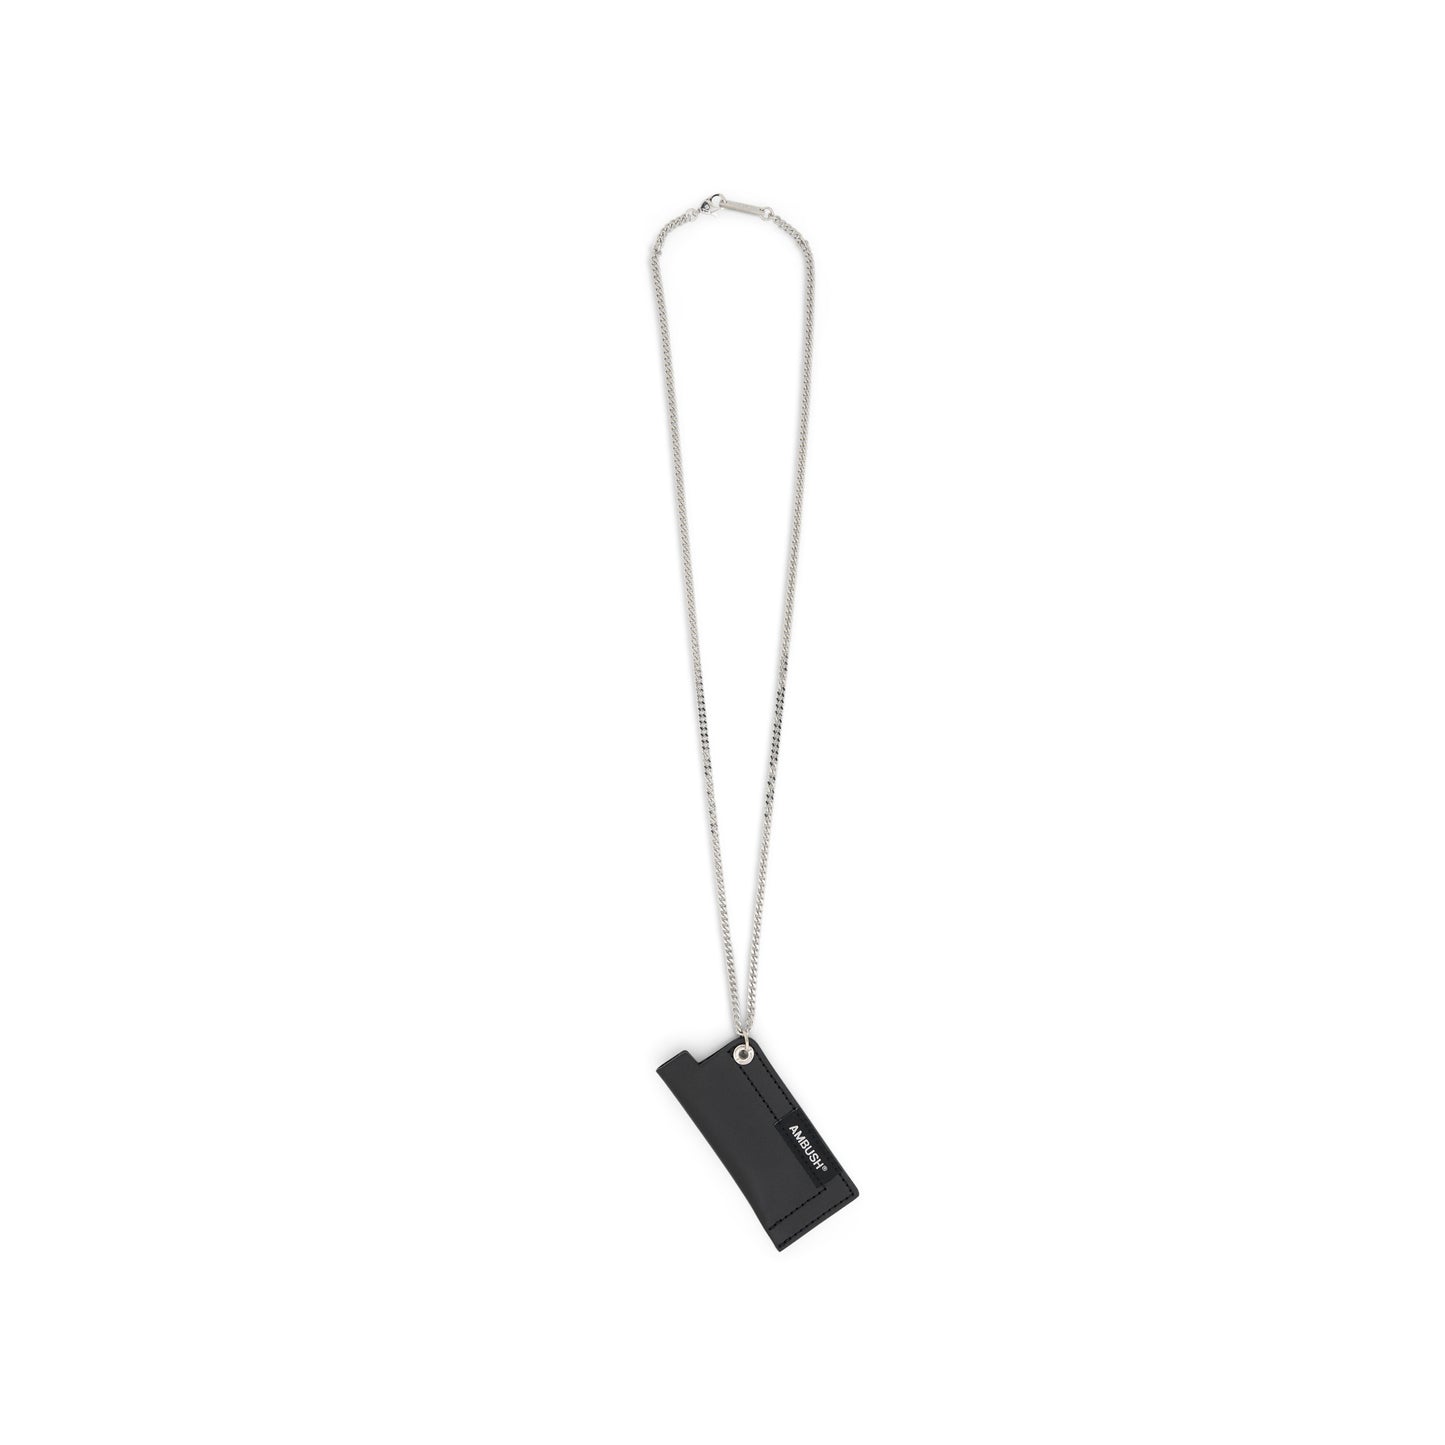 Leather Lighter Case Necklace in Black Silver